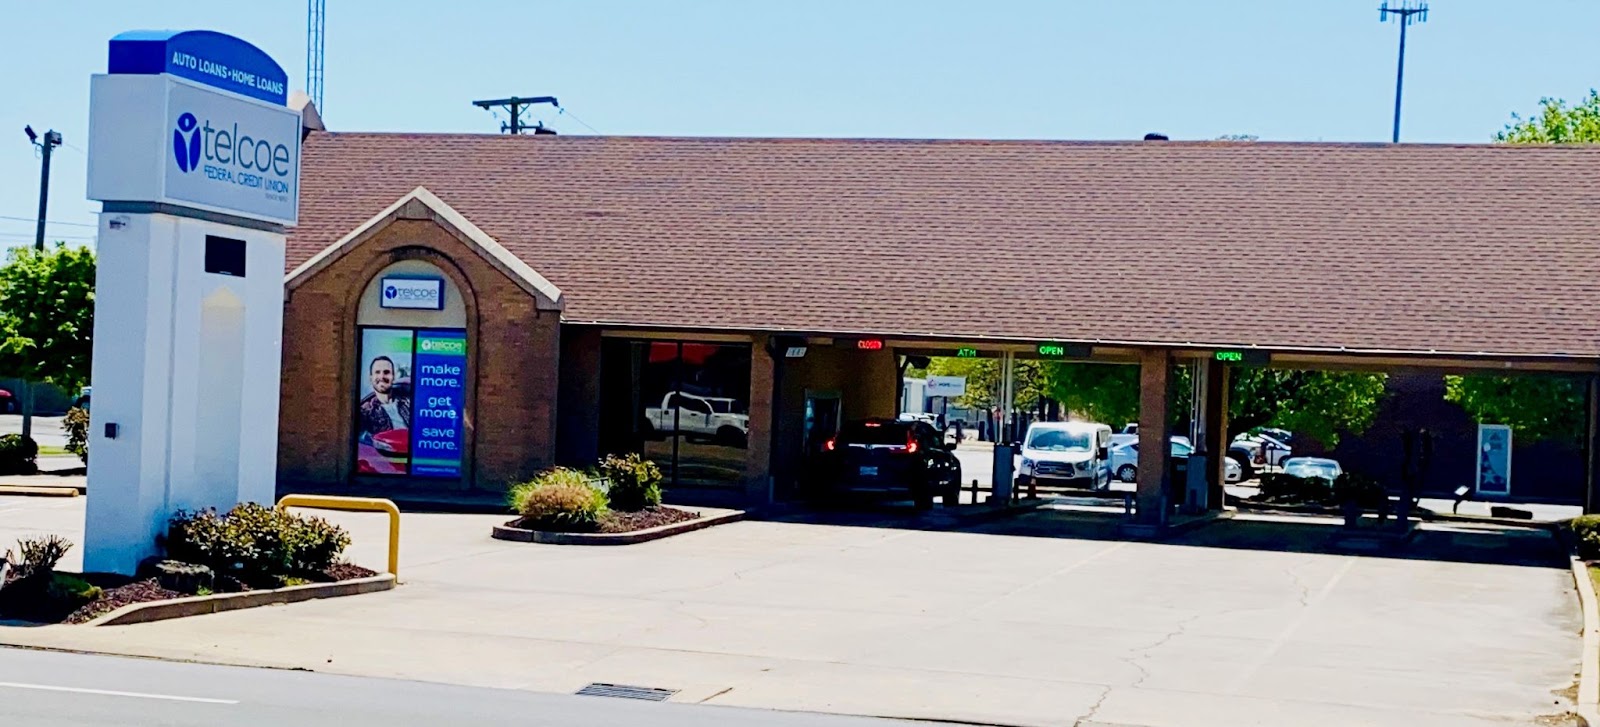 The Russellville, AR branch of Telcoe FCU.